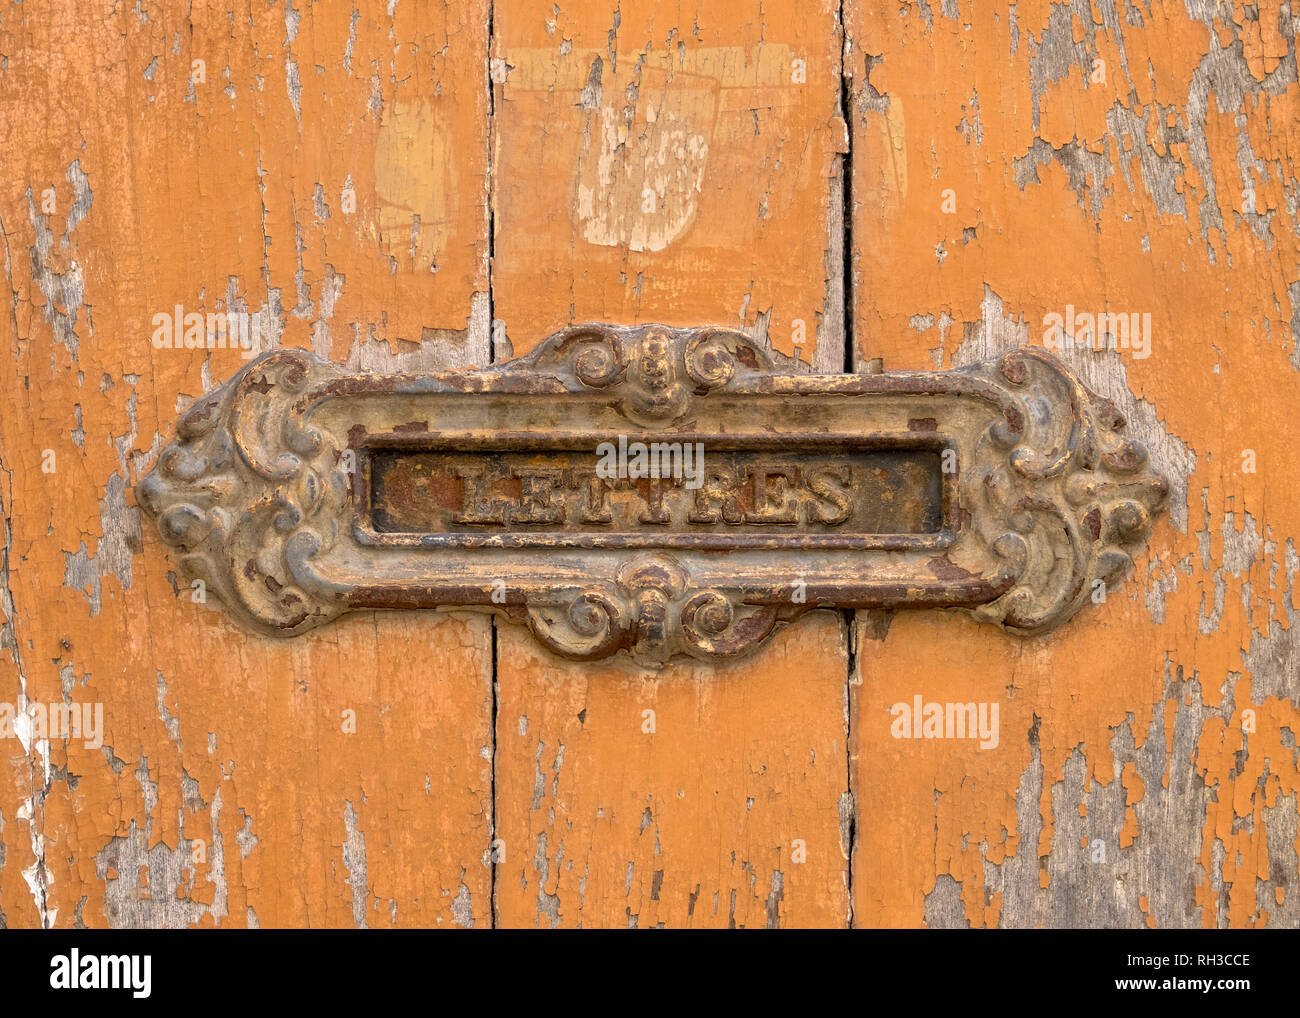 Rusted old French letter slot on orange peeling wood door.  Writing in French 'LETTRES' Stock Photo